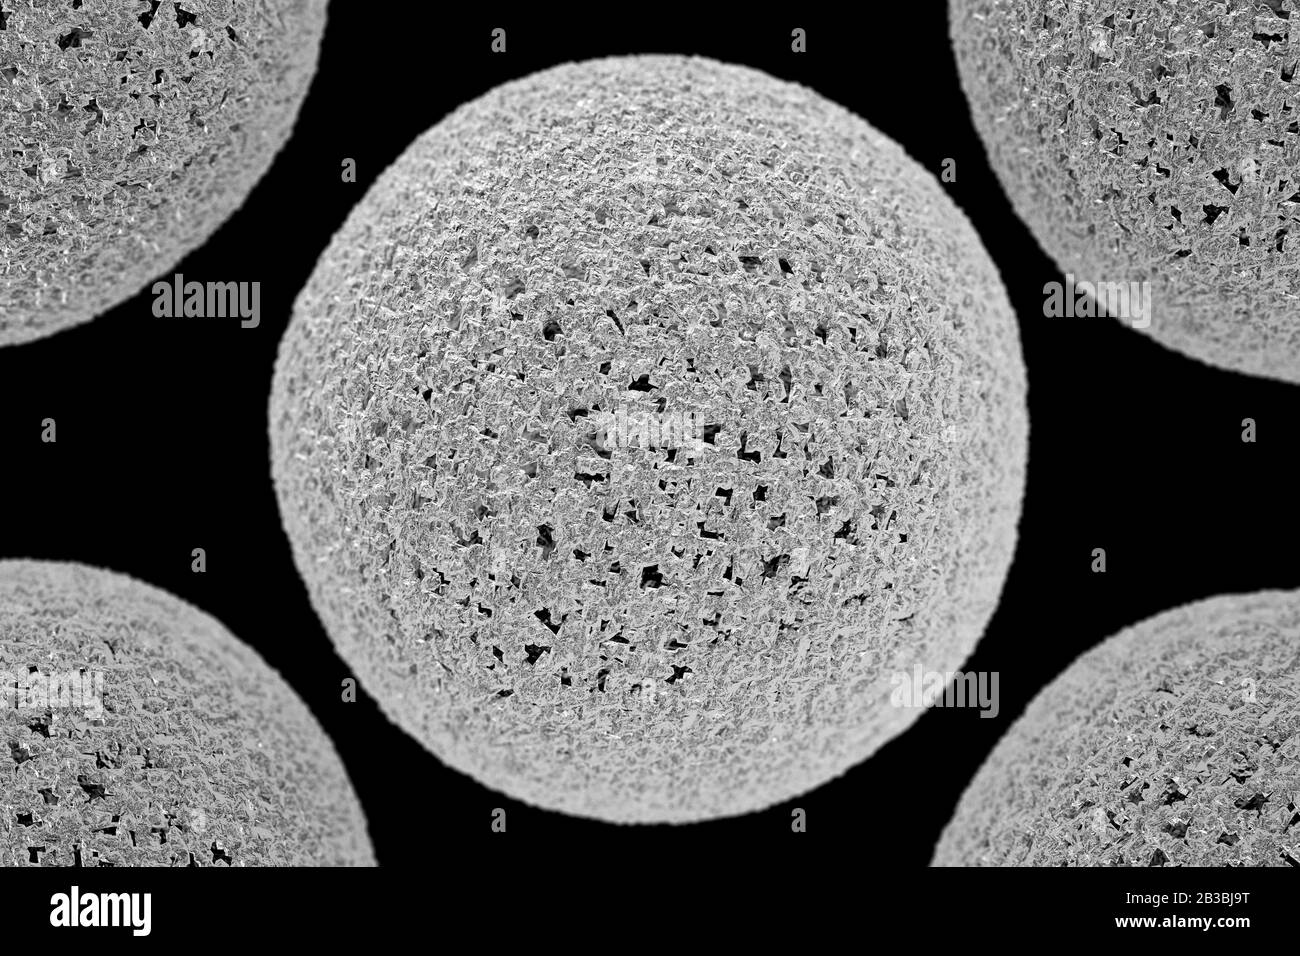 Closeup flower pollen grain particles for use for allergy background 3D illustration Stock Photo